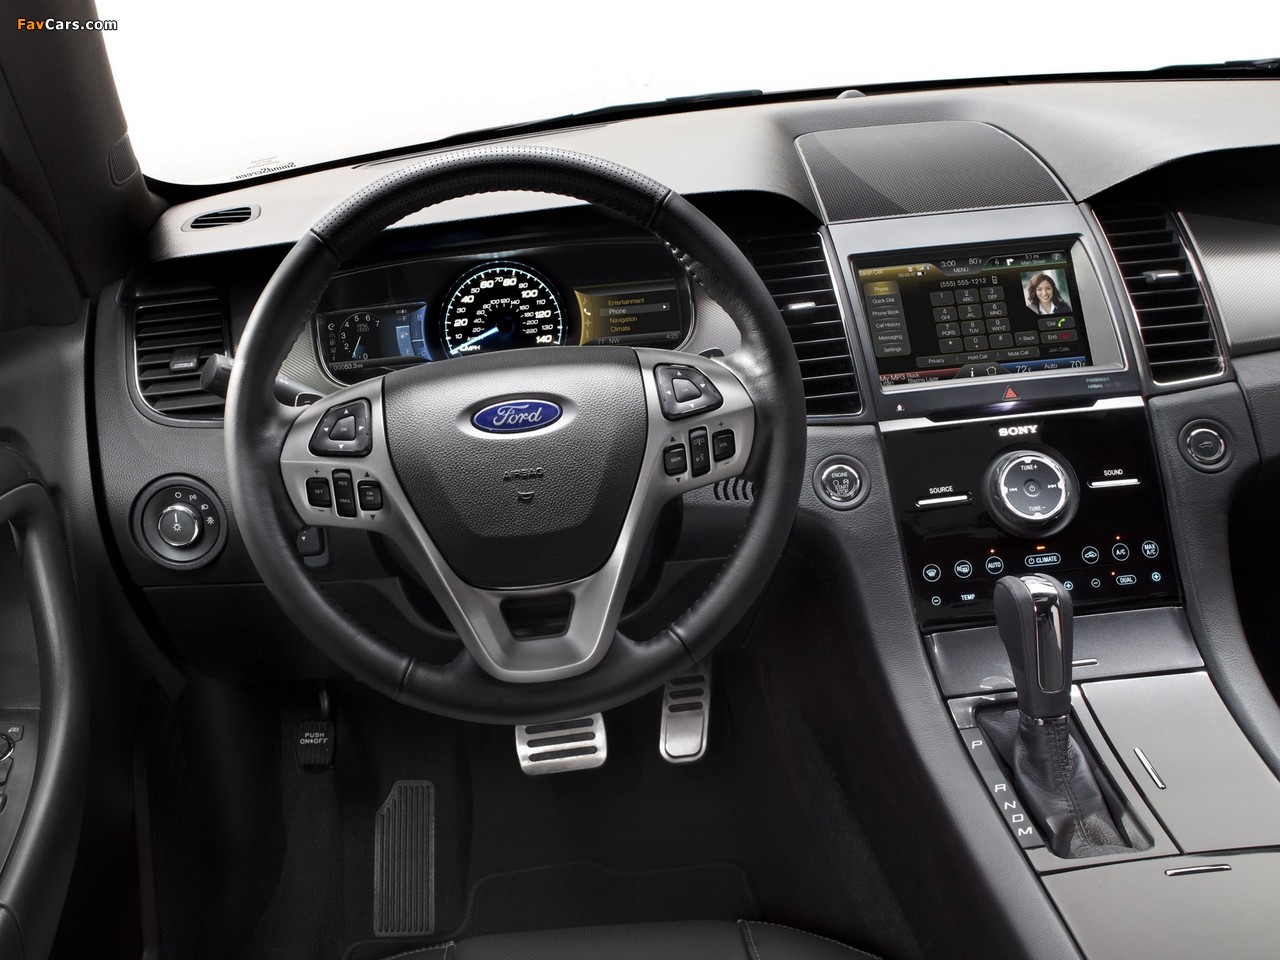 Ford Taurus SHO 2011 pictures (1280 x 960)